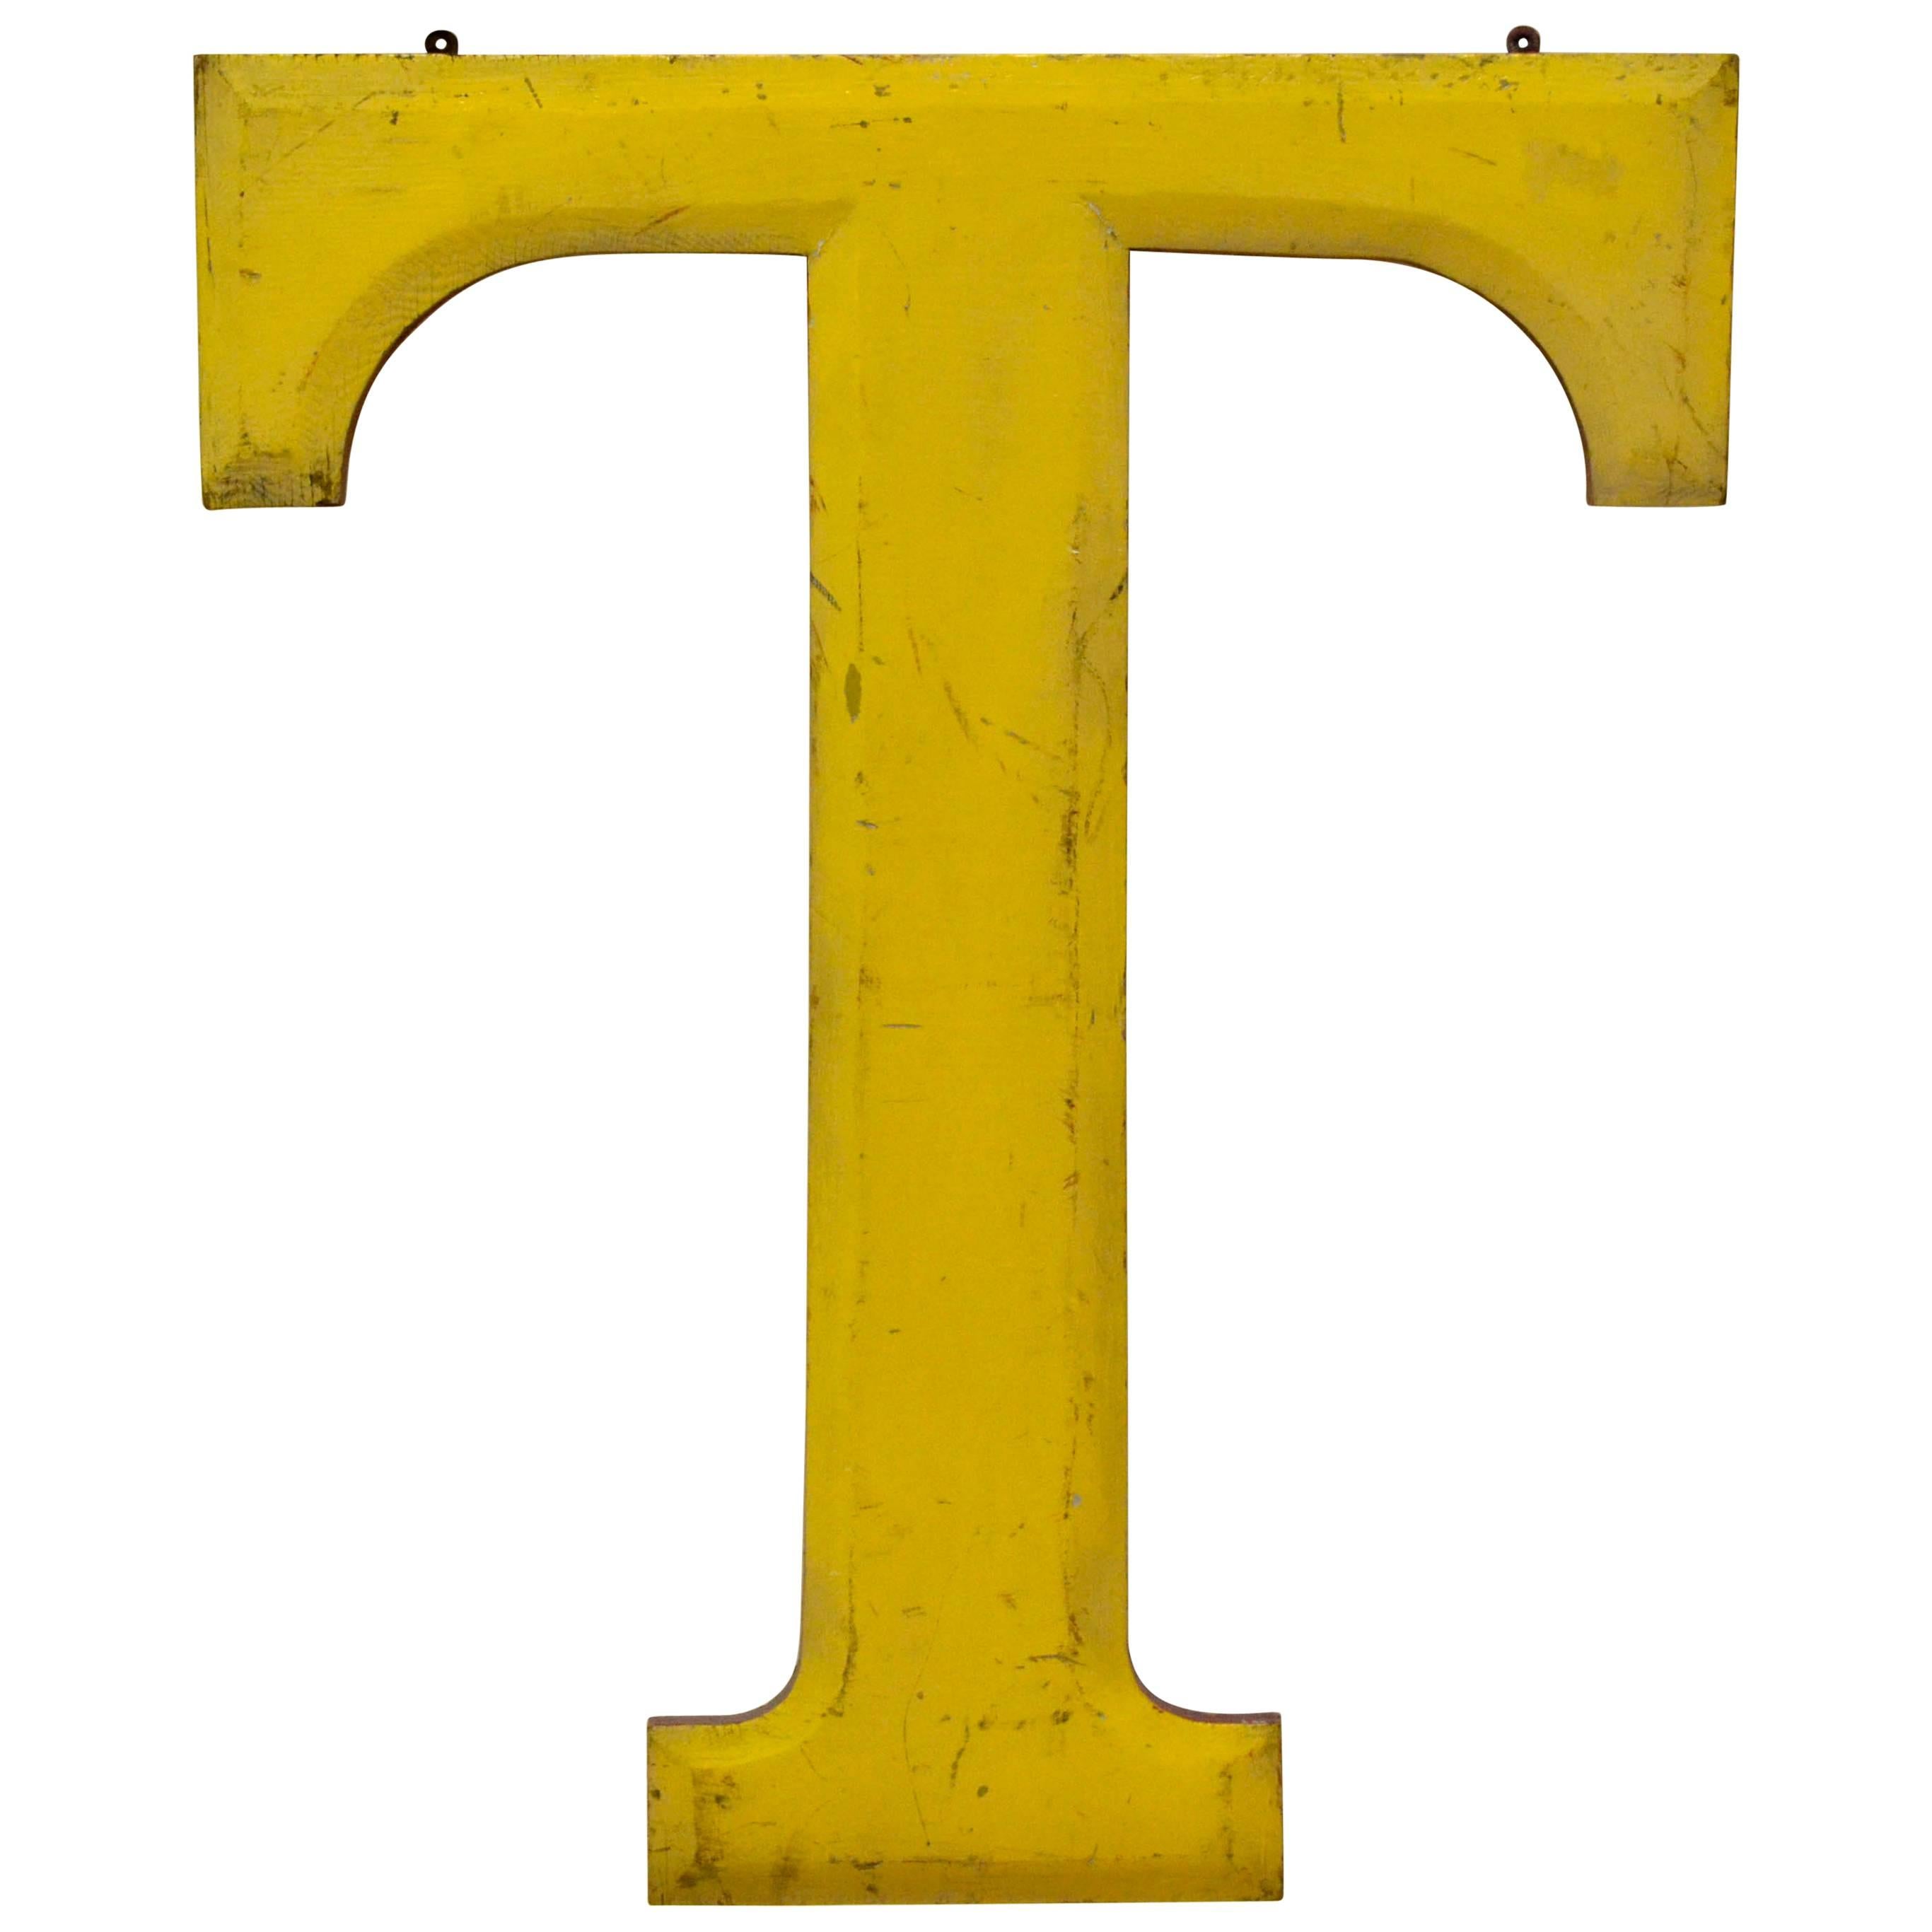 1960s Very Large Yellow Wooden Capital Letter T with Red Border Made in England